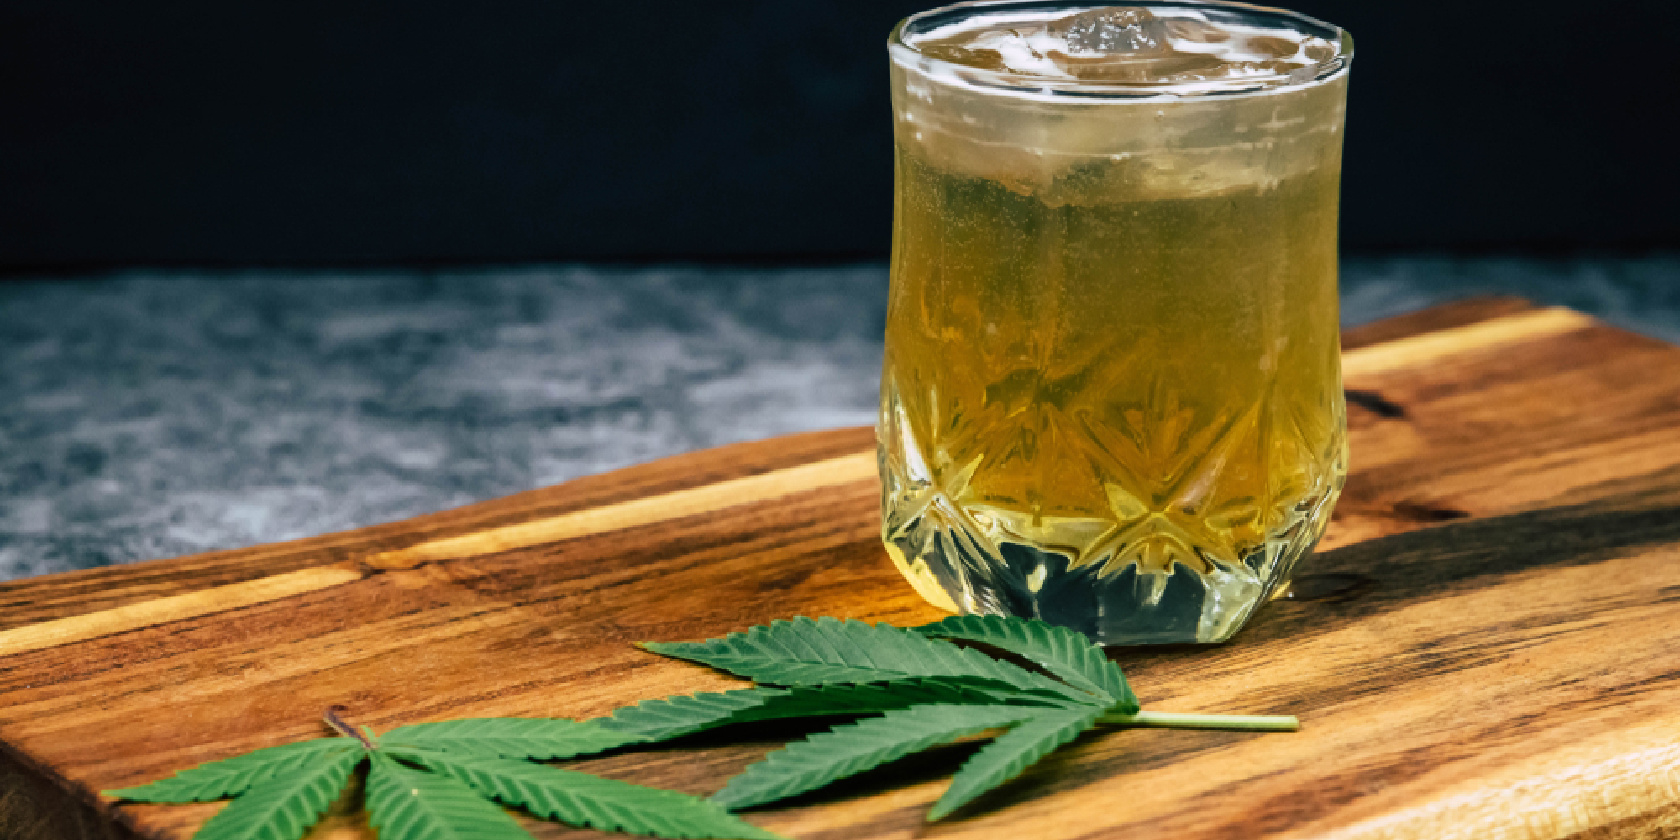 WHAT YOU NEED TO KNOW ABOUT DOSING CANNABIS EDIBLES AND CANNABIS BEVERAGES